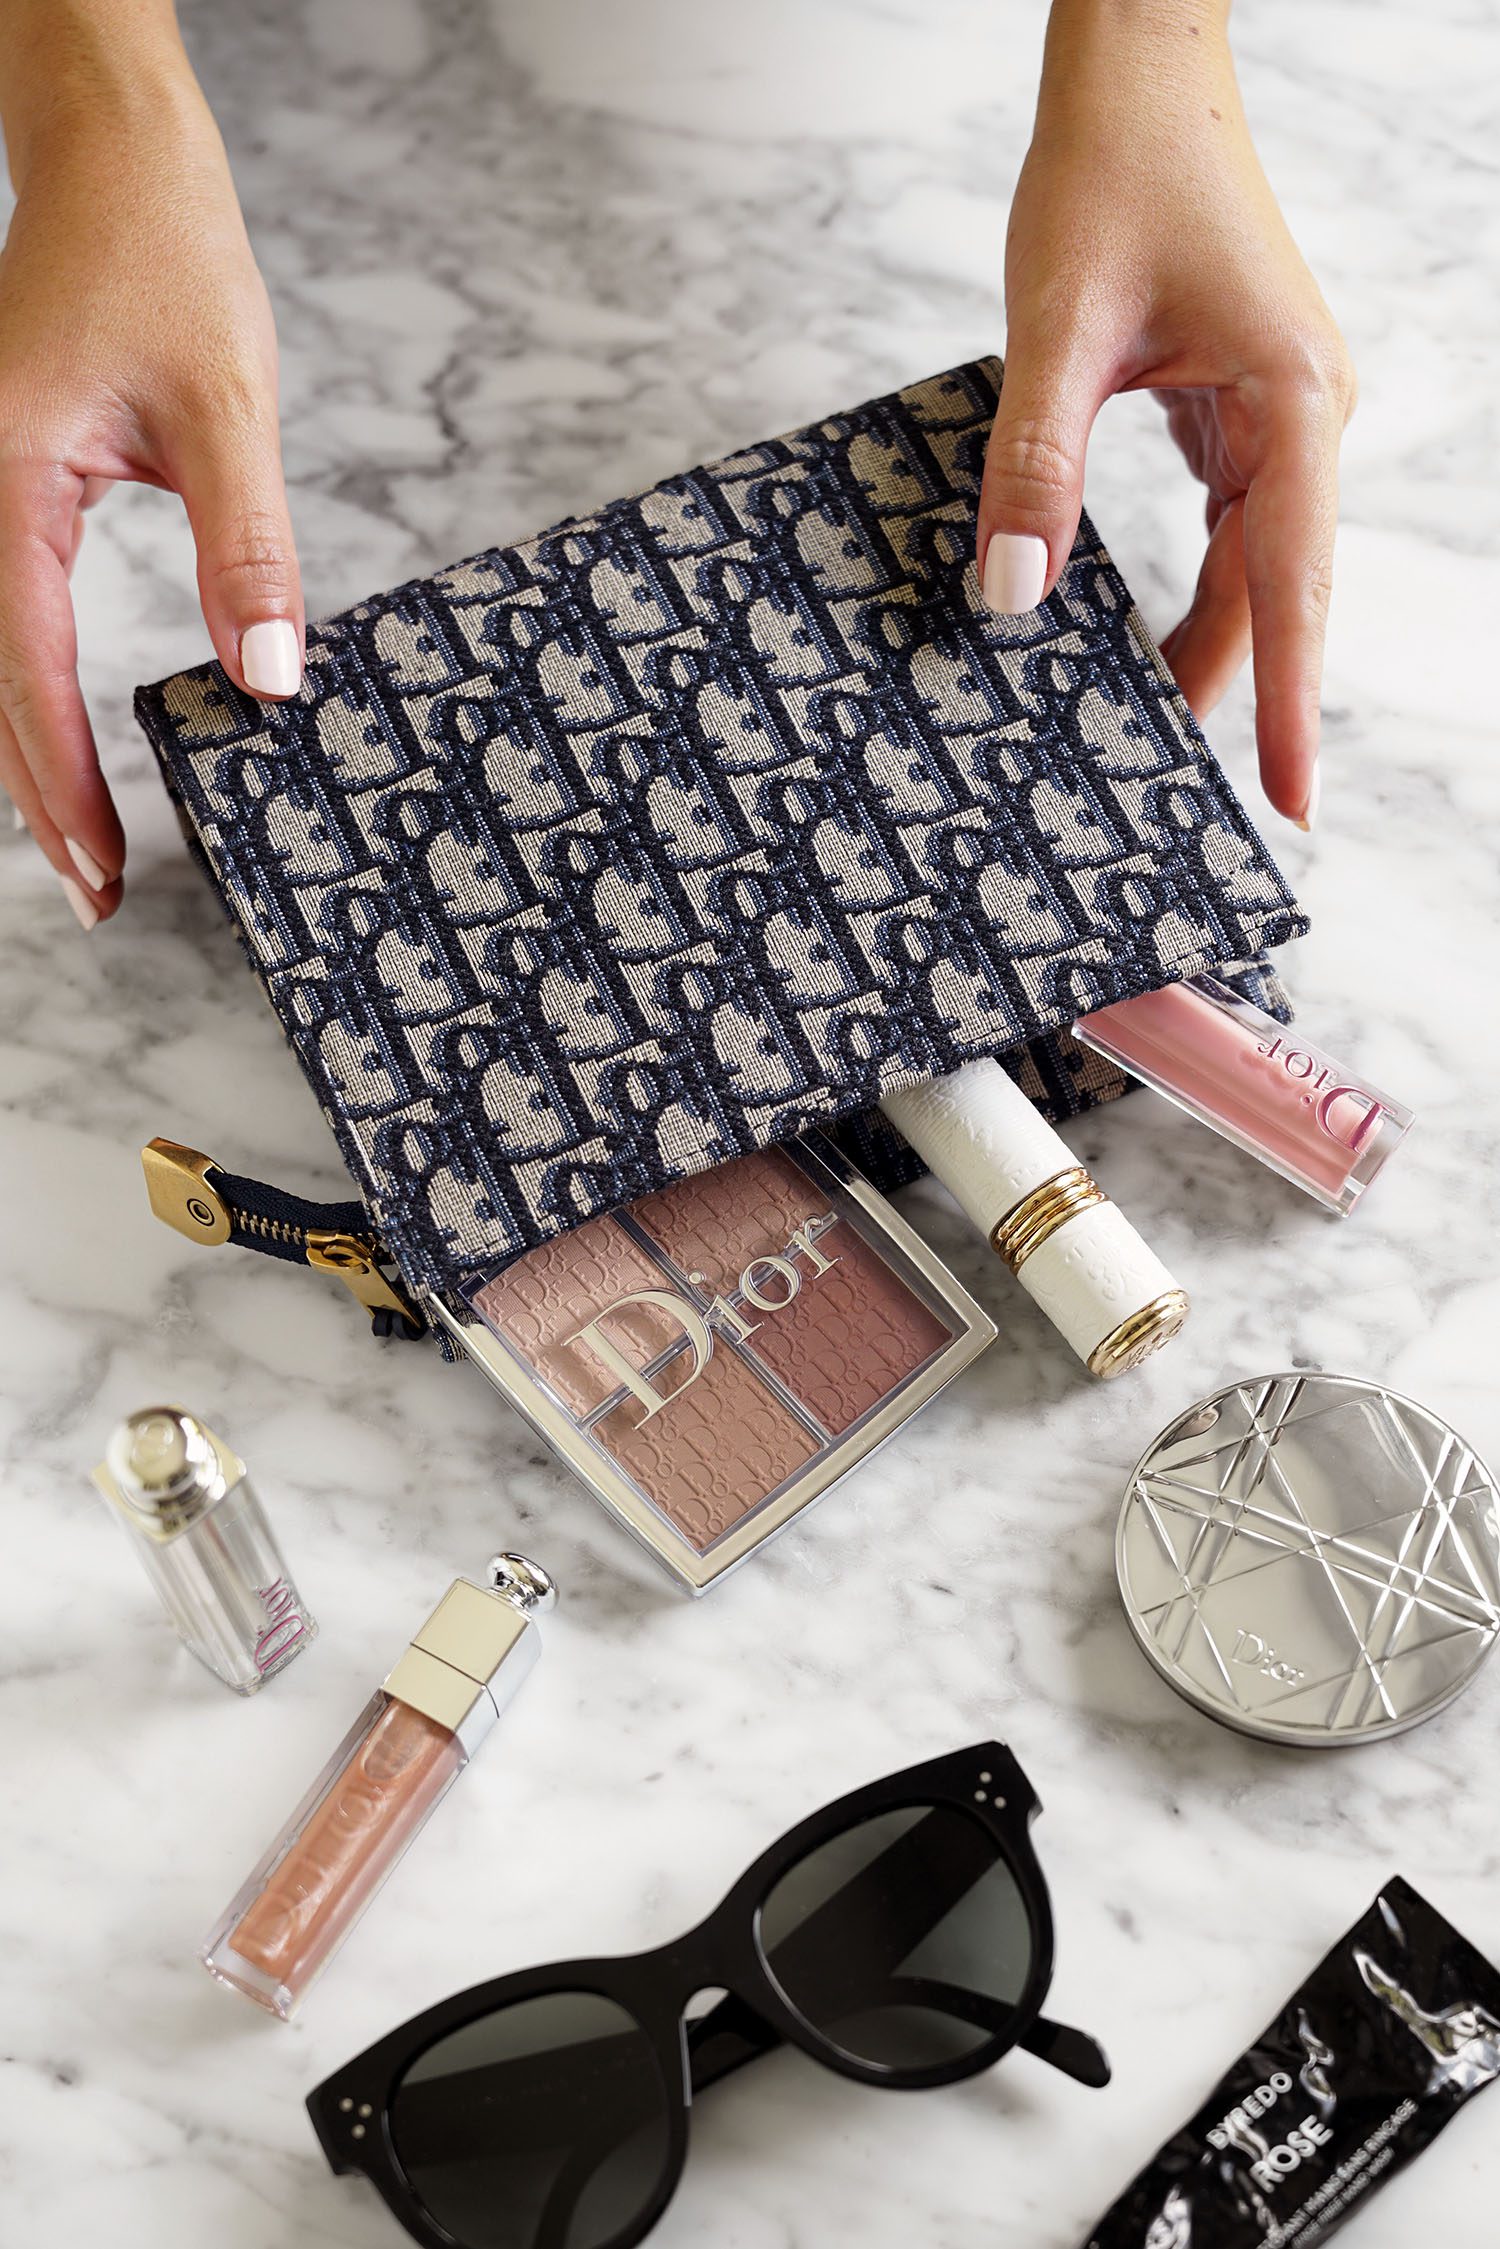 Dior Oblique Pouch, The Beauty Look Book